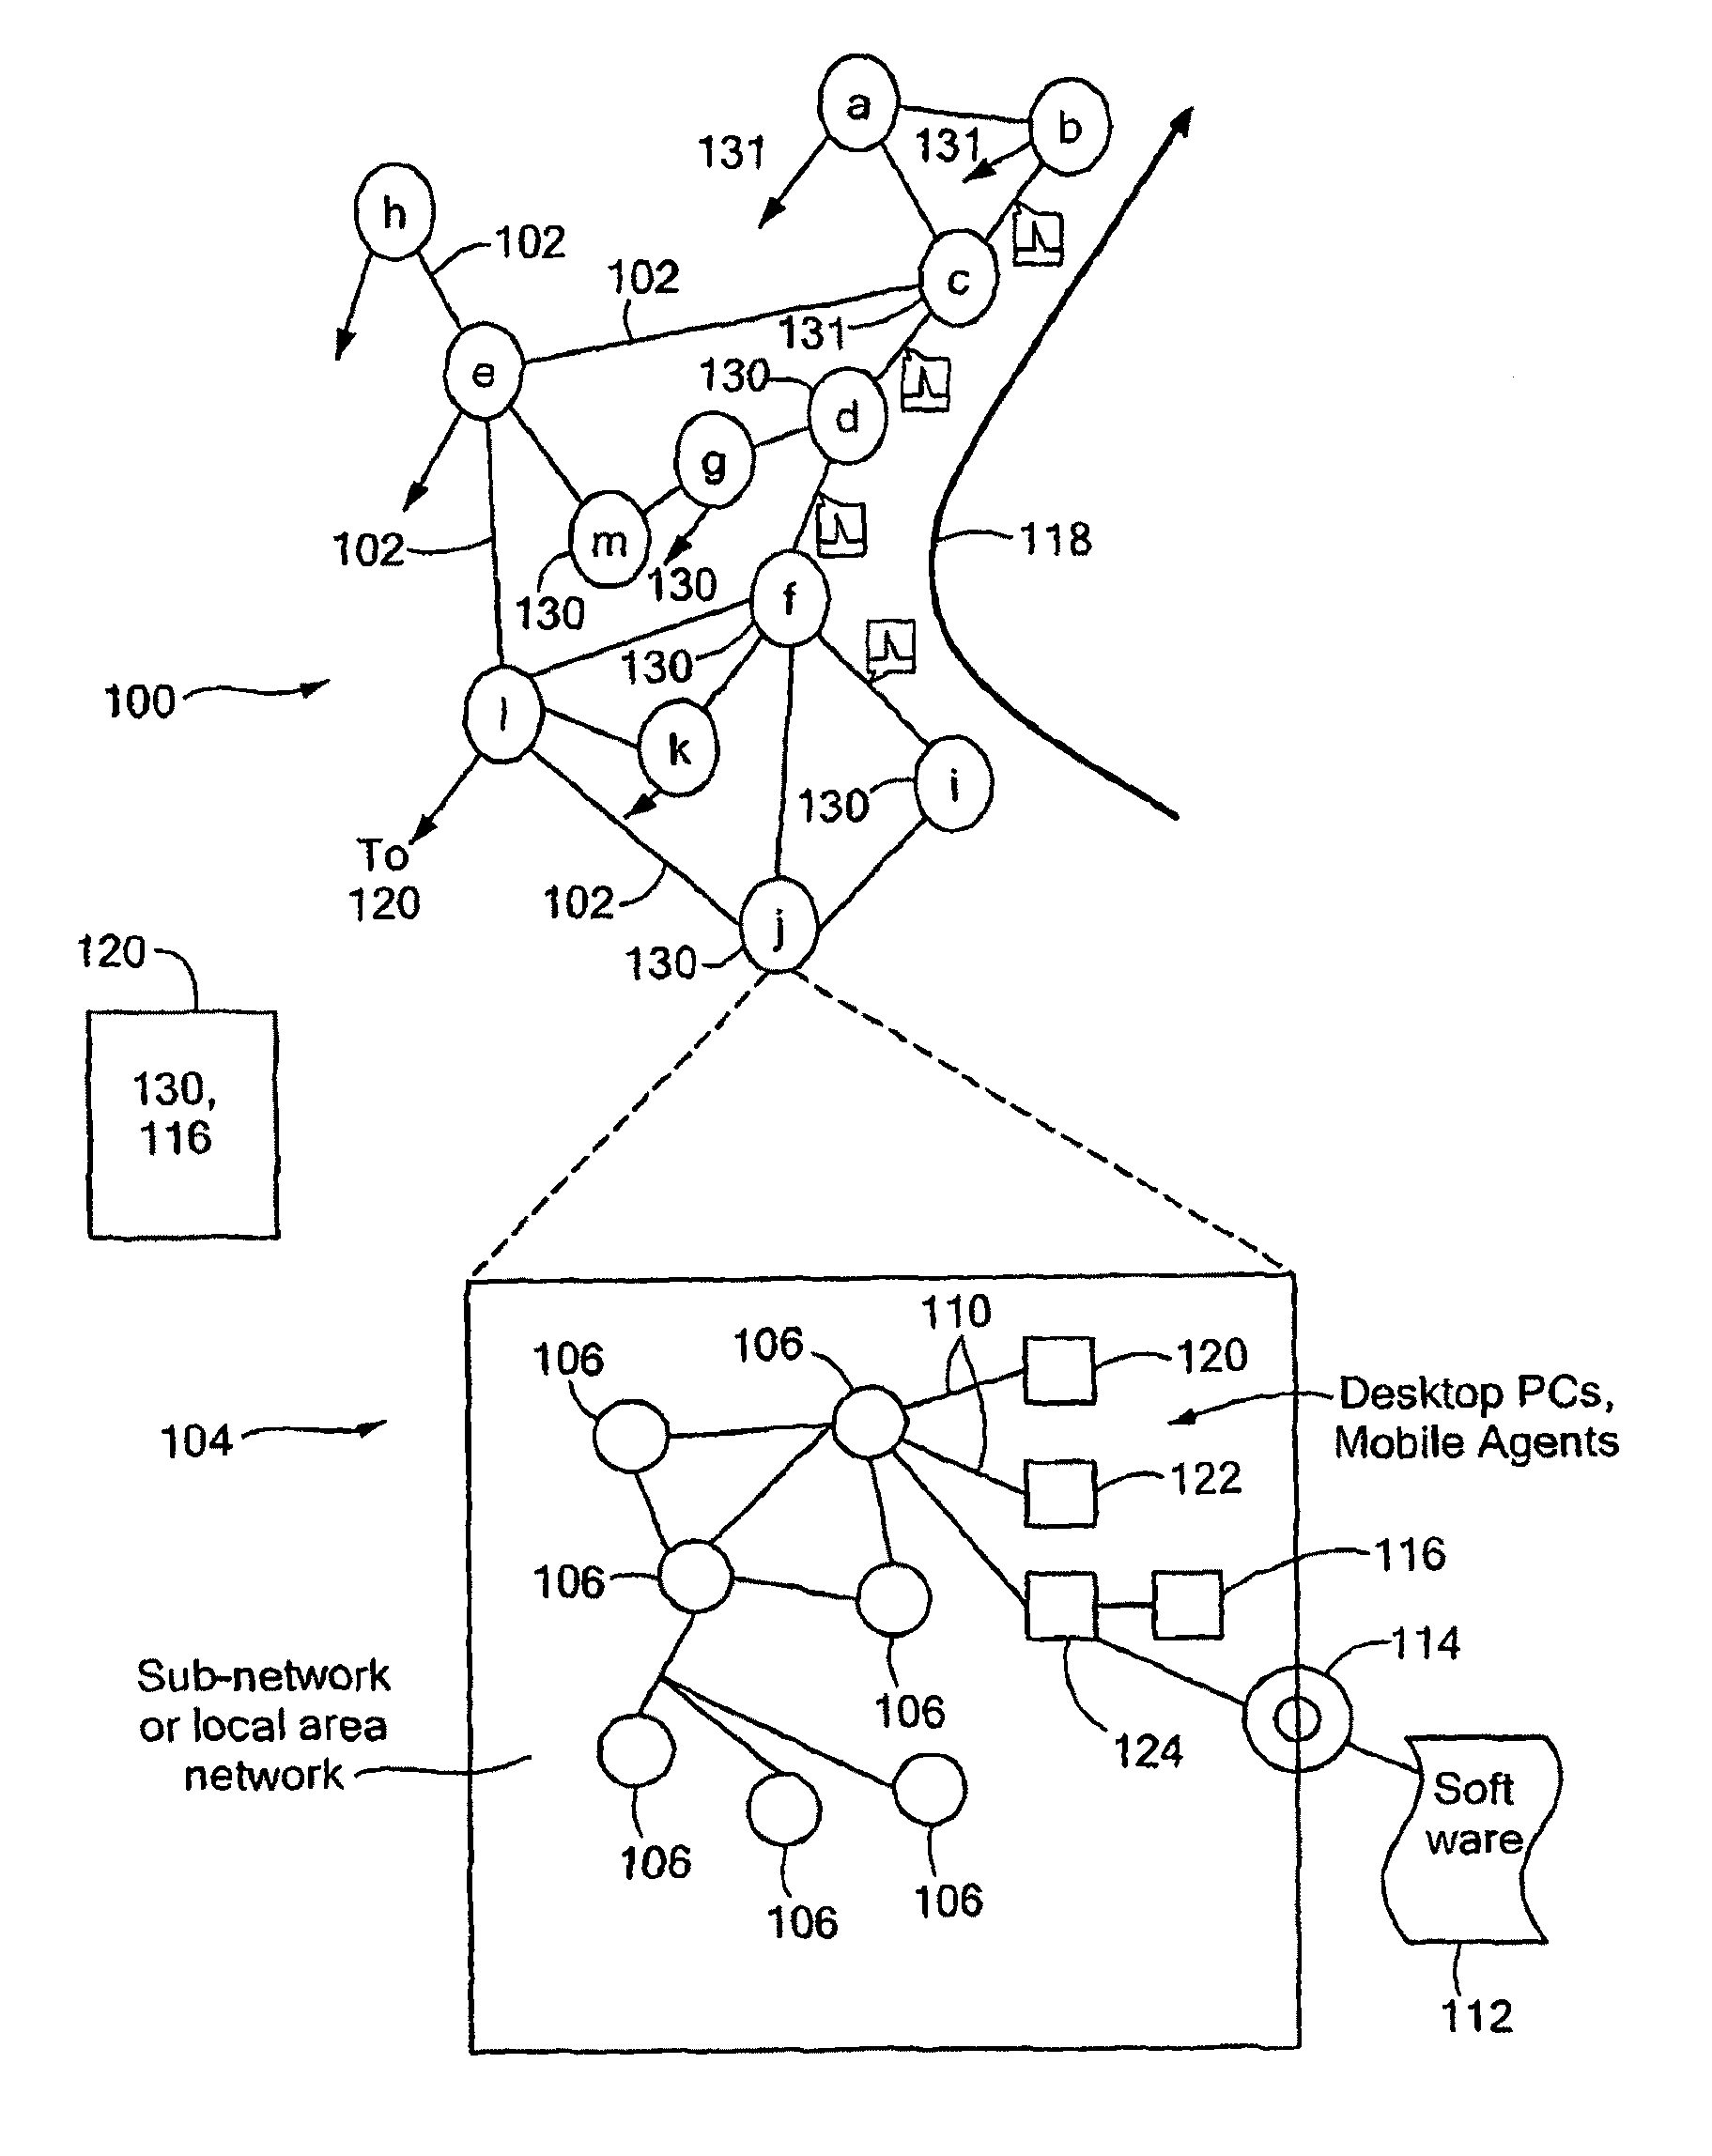 Method and apparatus for whole-network anomaly diagnosis and method to detect and classify network anomalies using traffic feature distributions